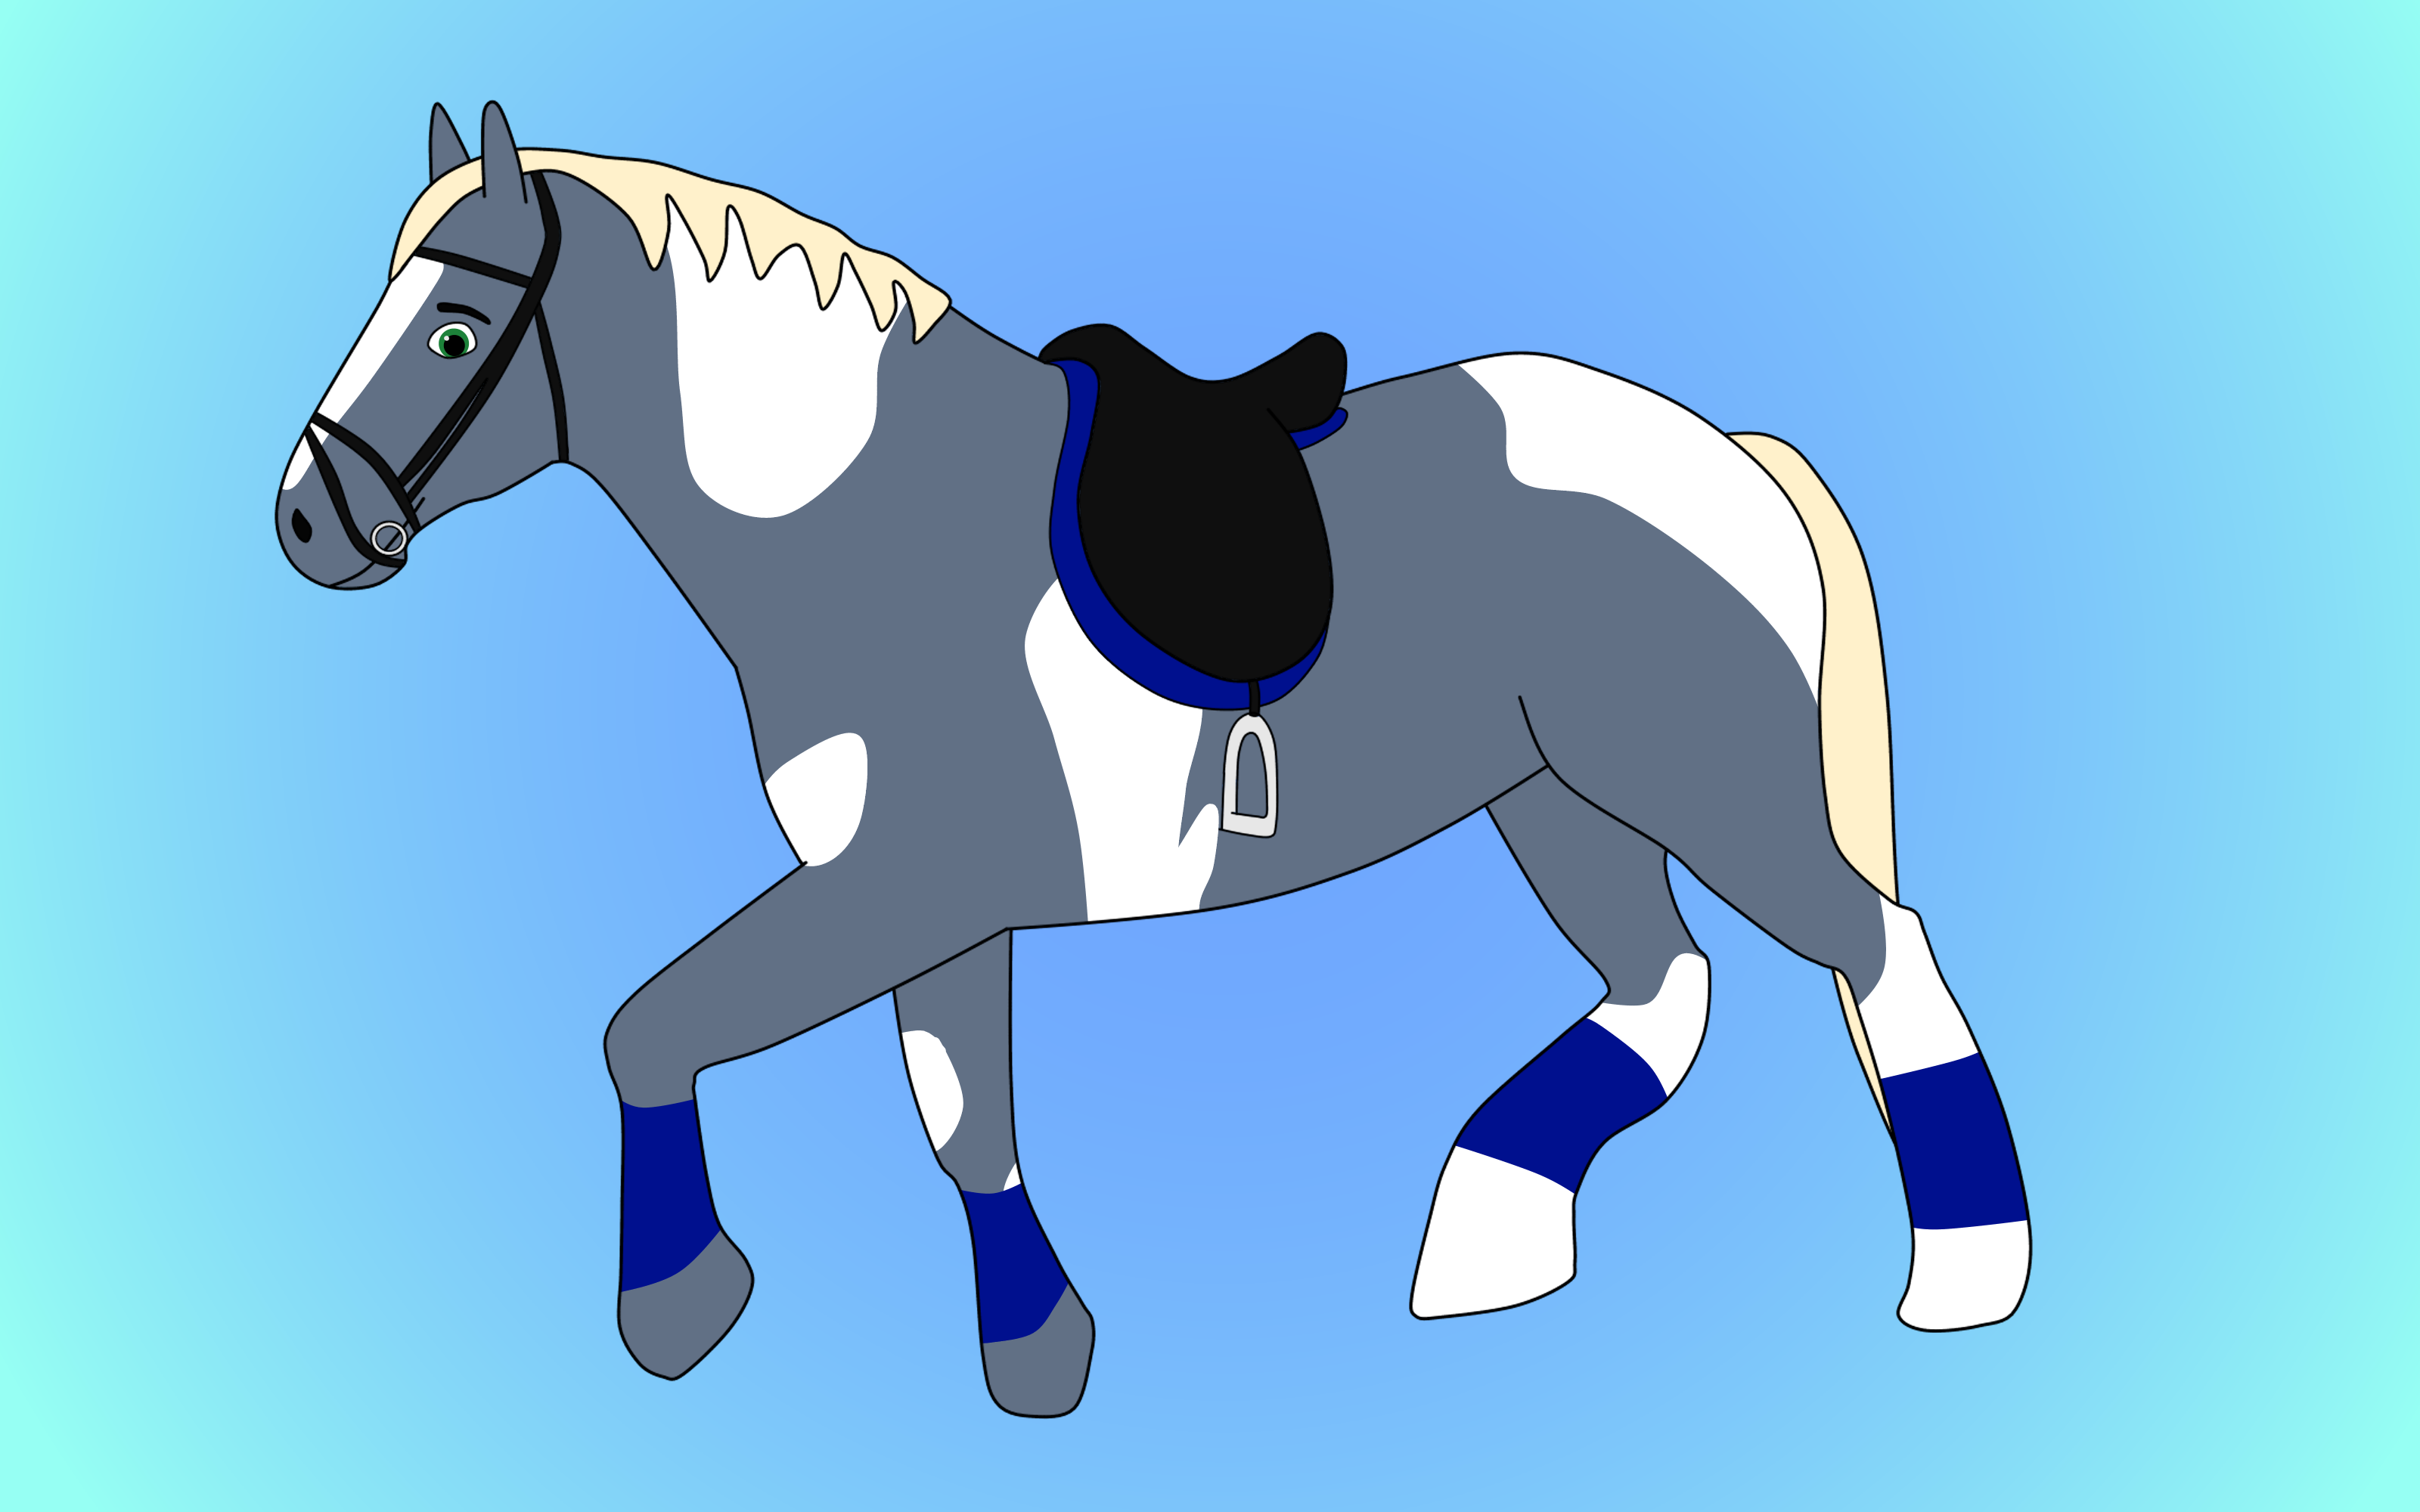 ROBLOX - Patch's Horse by Chandlertrainmaster1 on DeviantArt